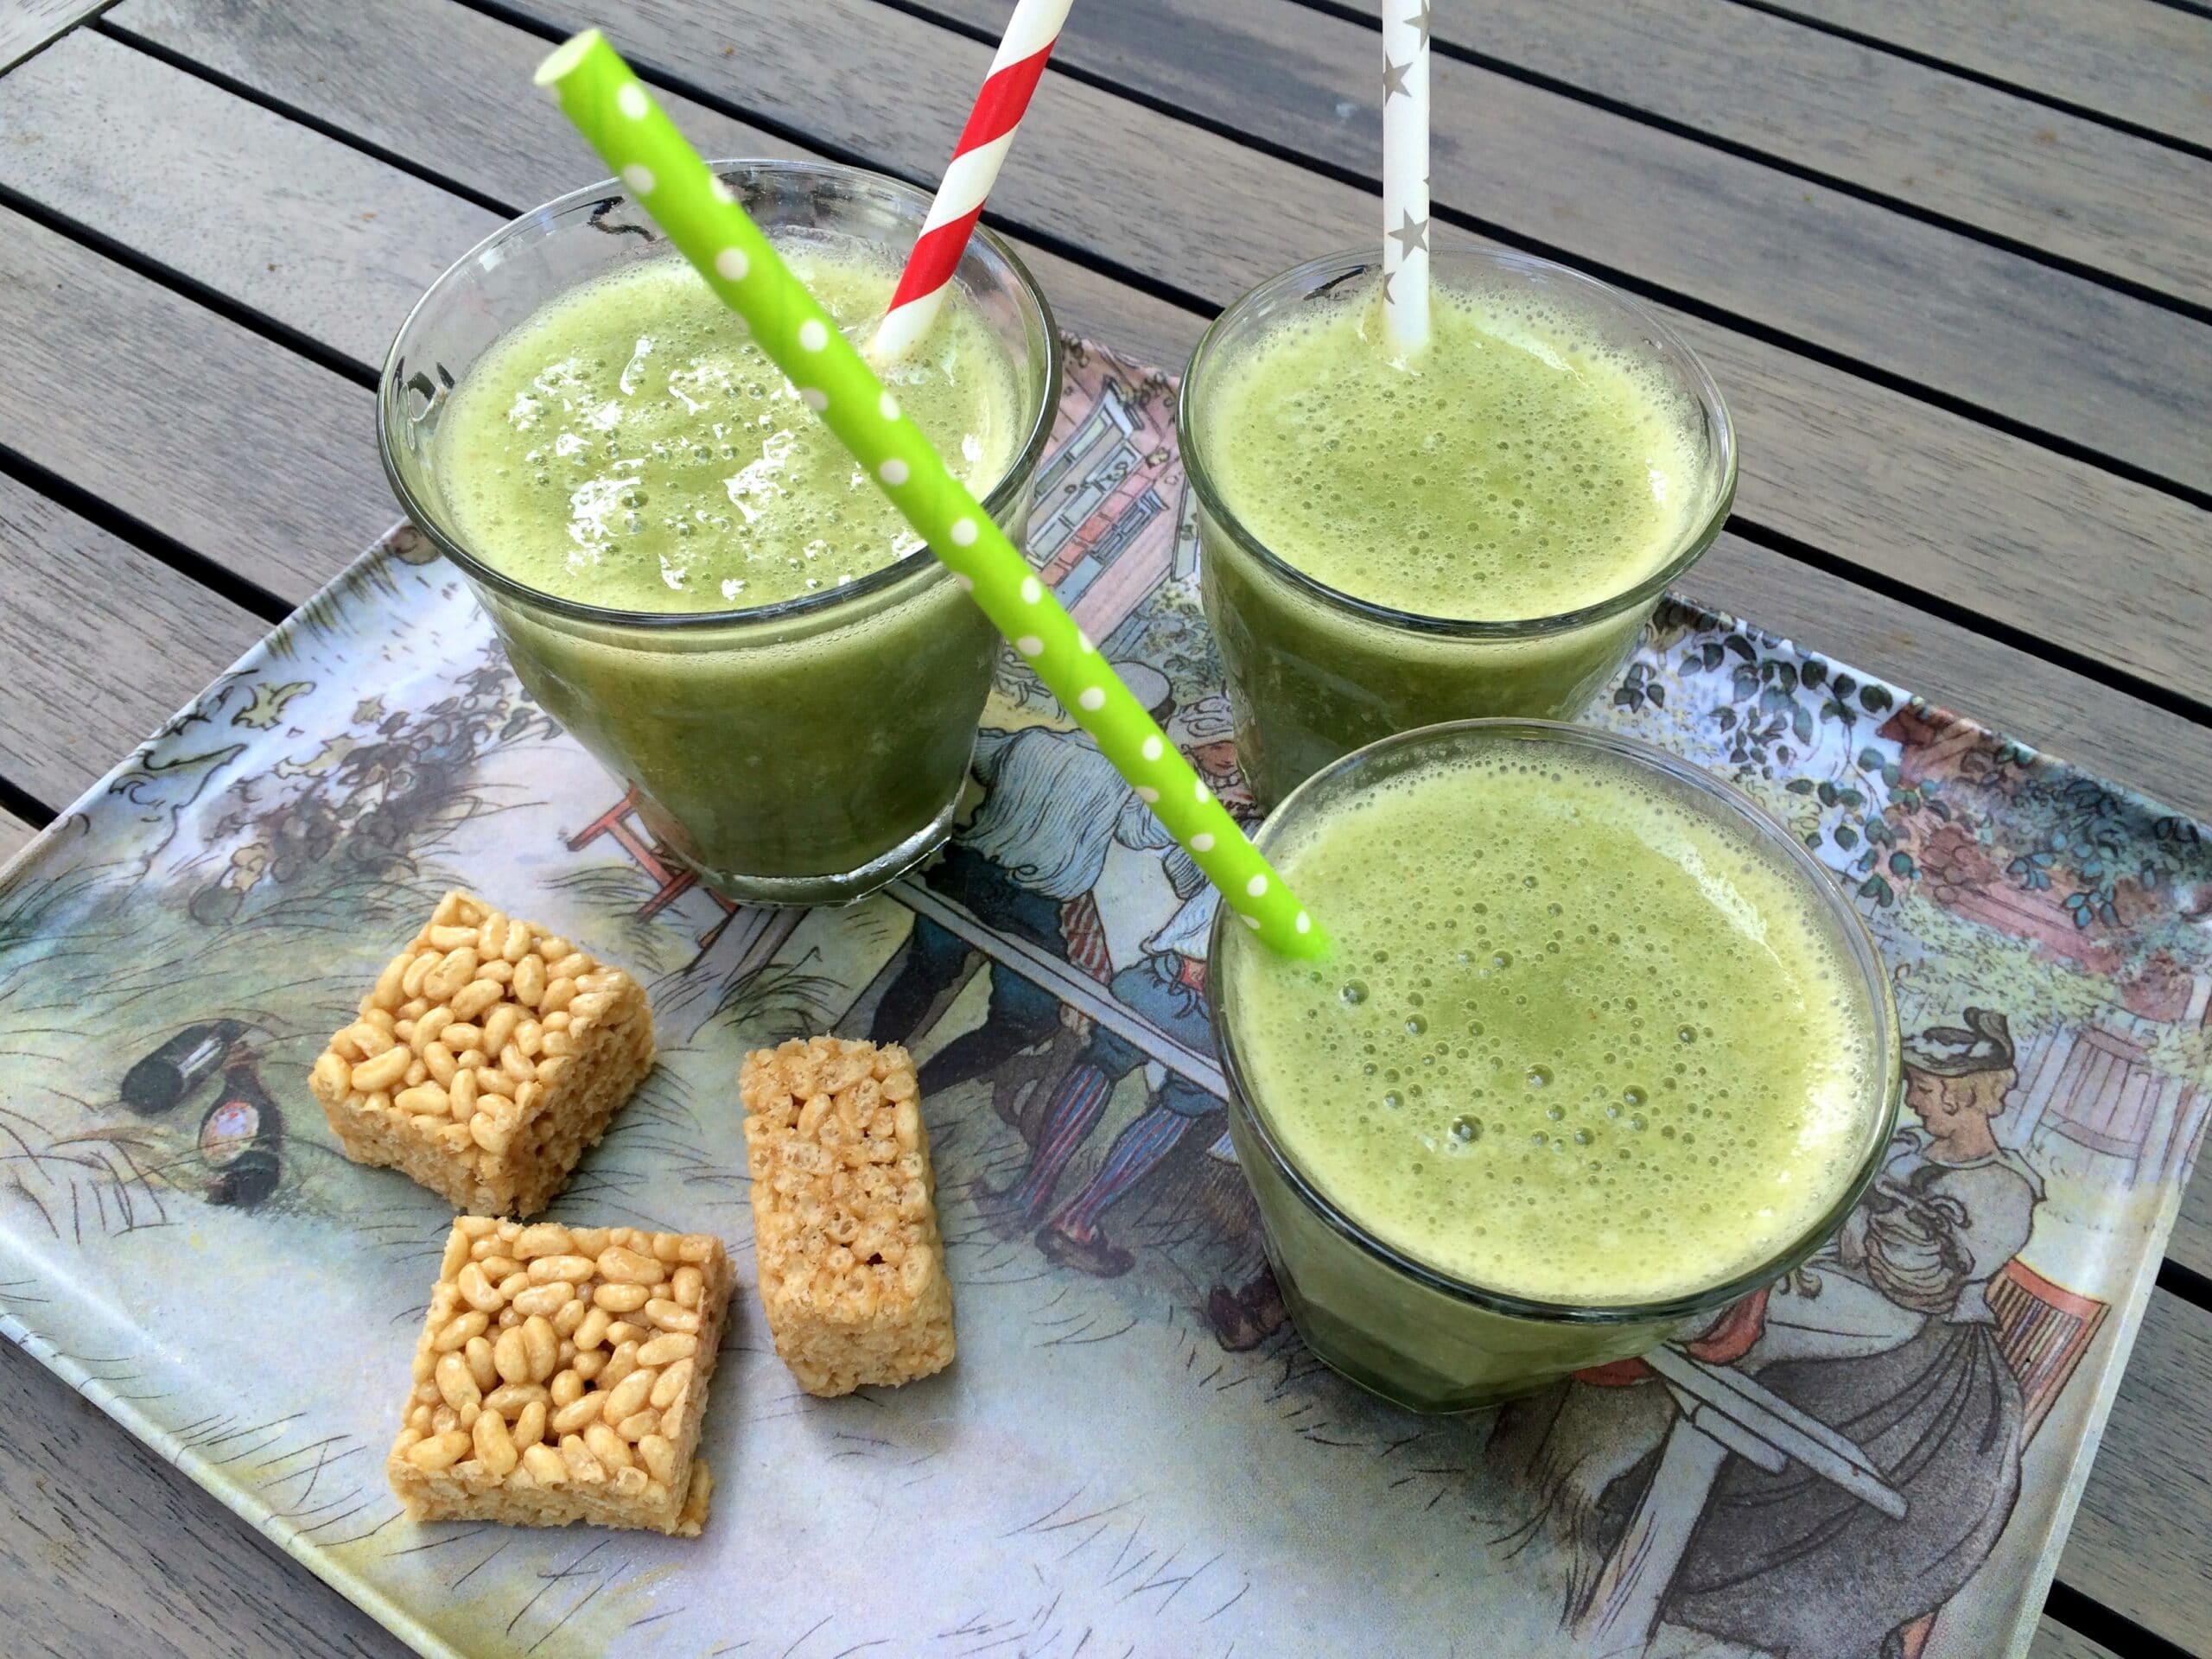 Kid-Approved Green Smoothie - tested at elementary school health fair with overwhelming approval from the kids! Recipe by Sonnet at In Sonnet's Kitchen.